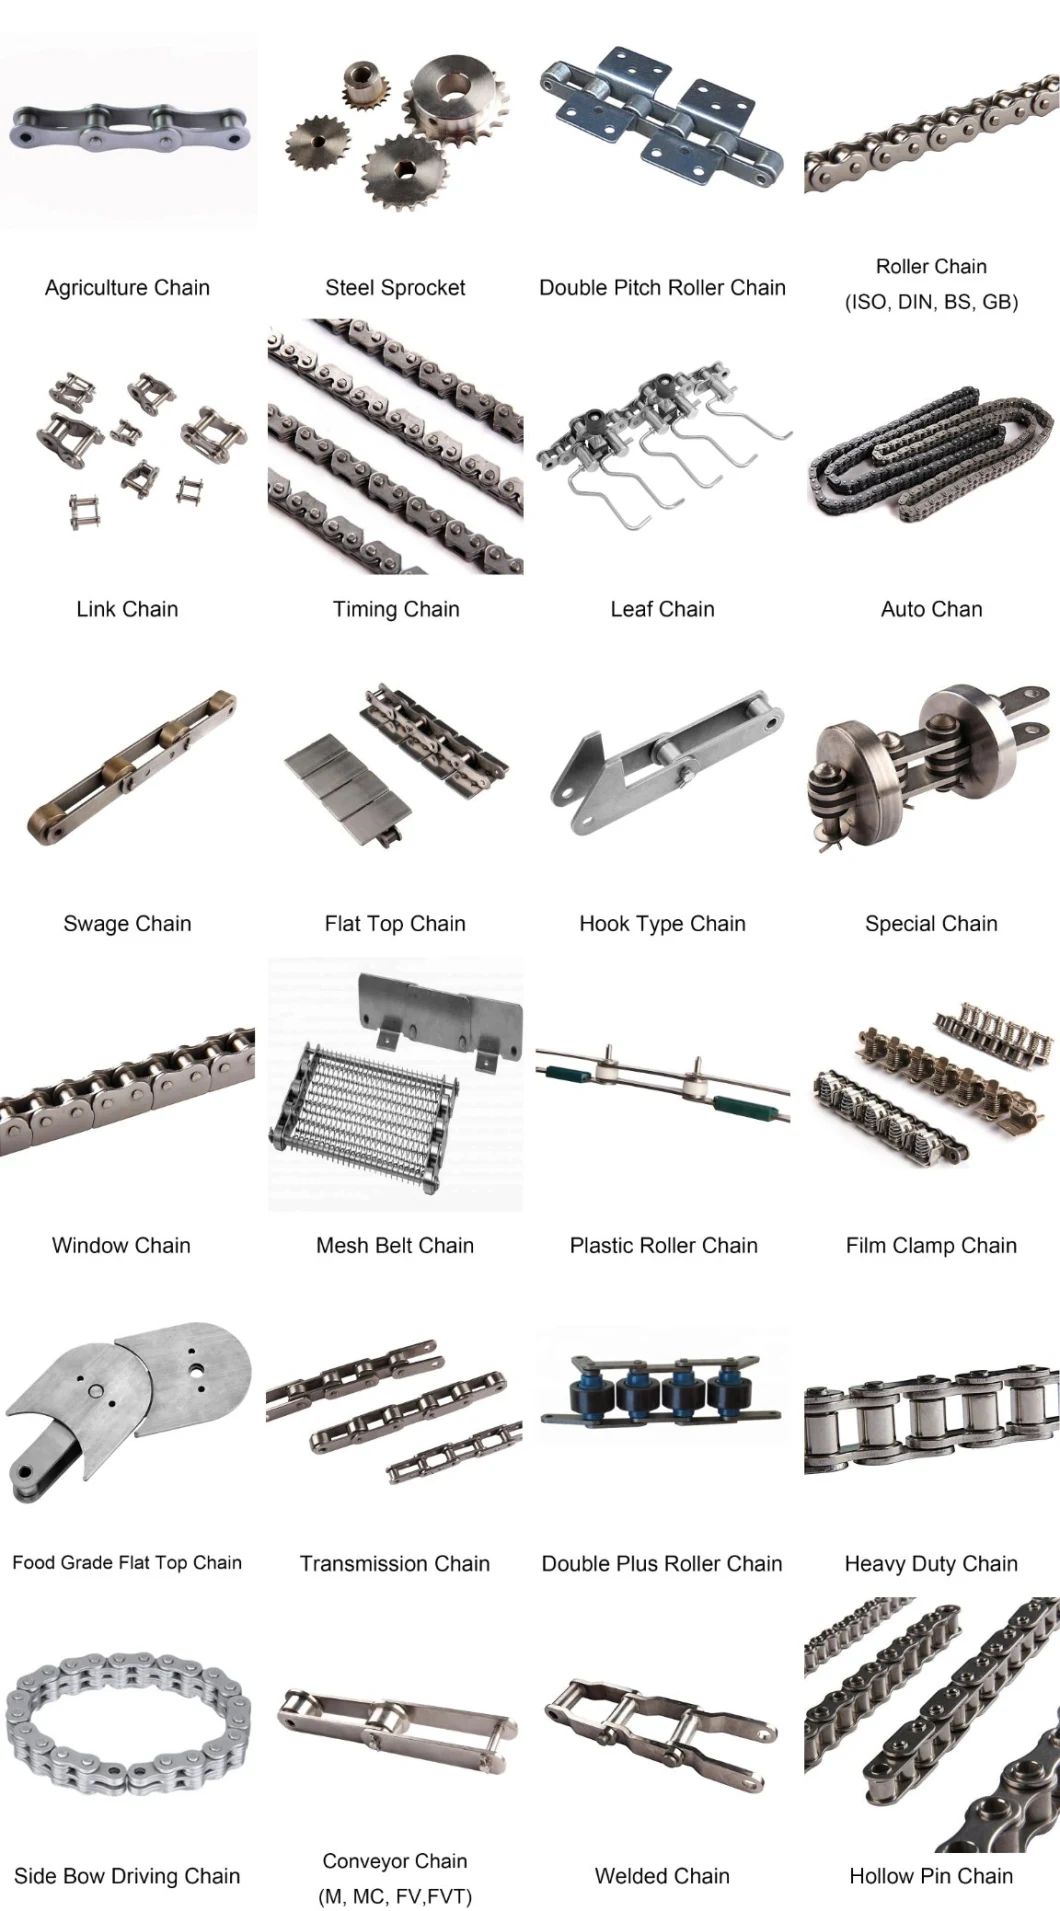 High Quality Stainless Steel Short Pitch Precision Duplex Roller Chains (A series)